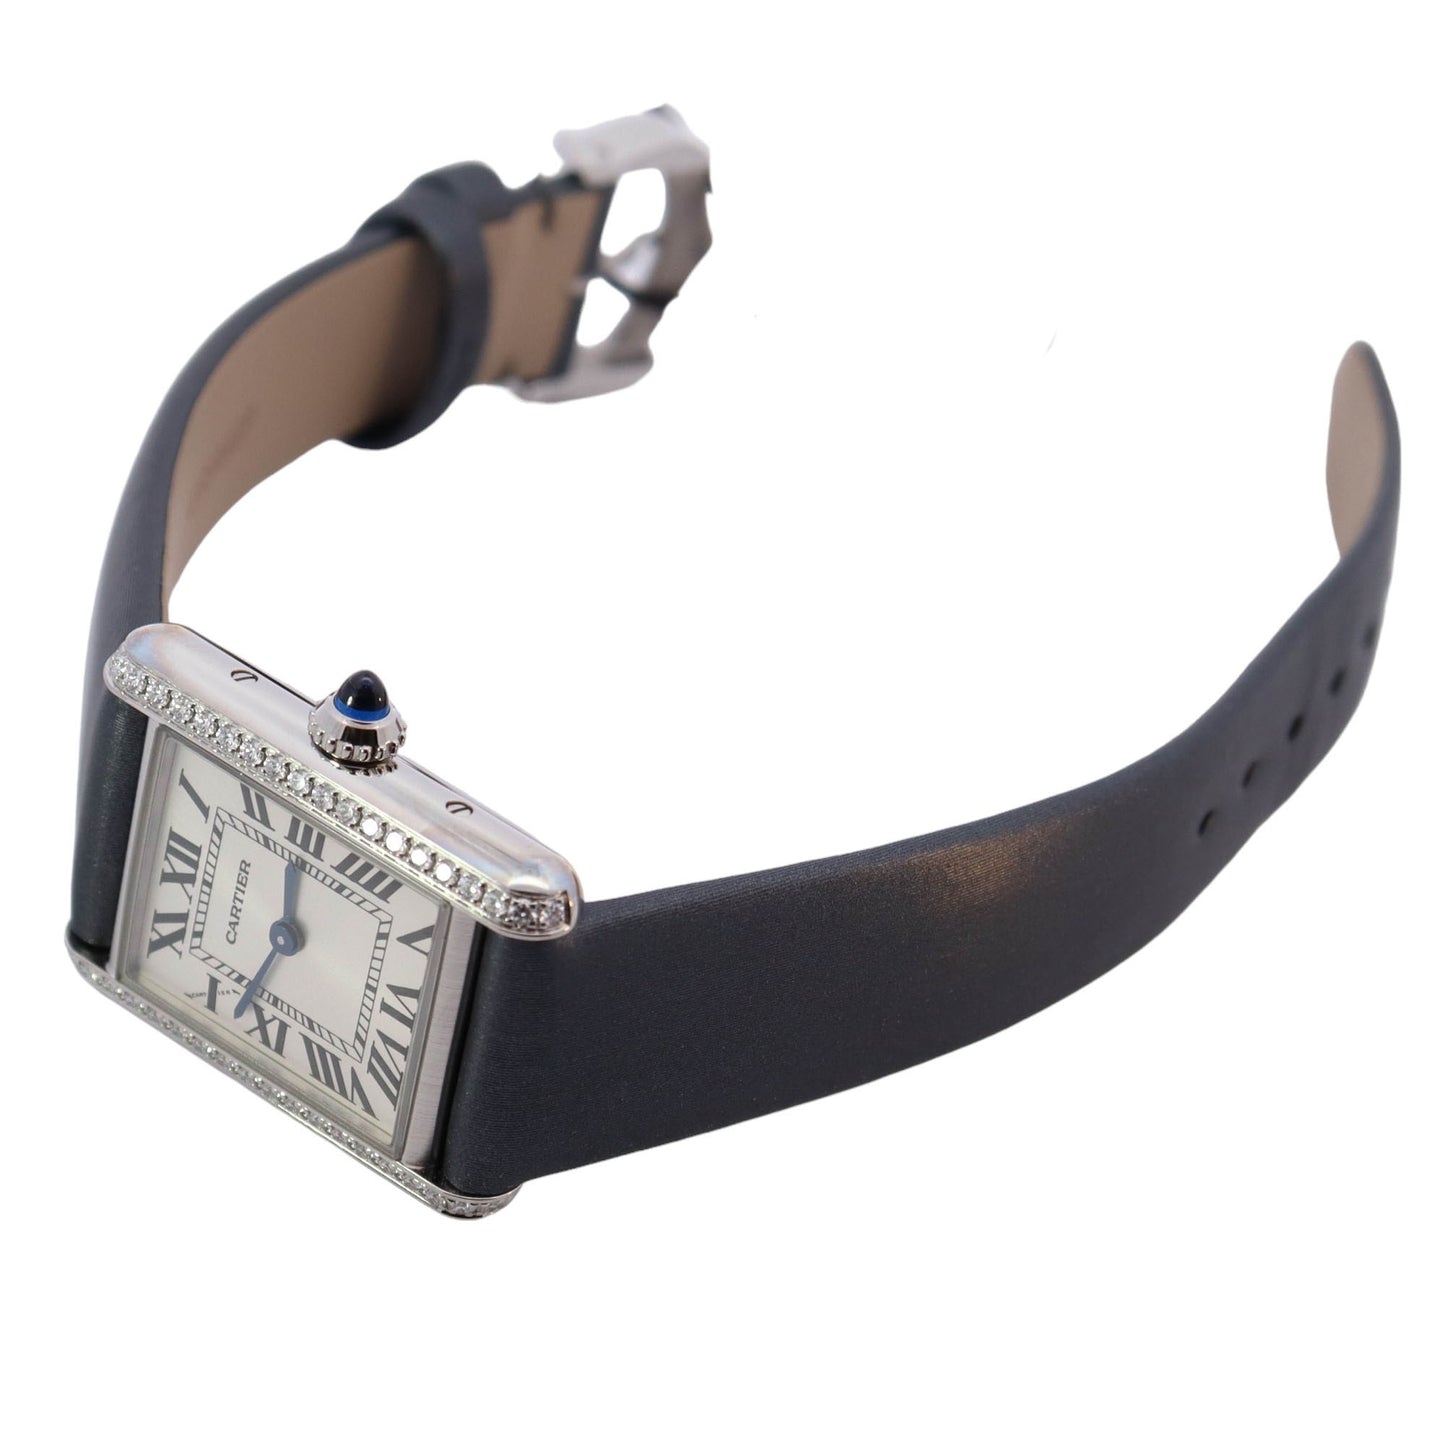 Cartier Tank Must Stainless Steel 29x22 Small Model Silver Roman Dial Watch Reference #: W4TA0016